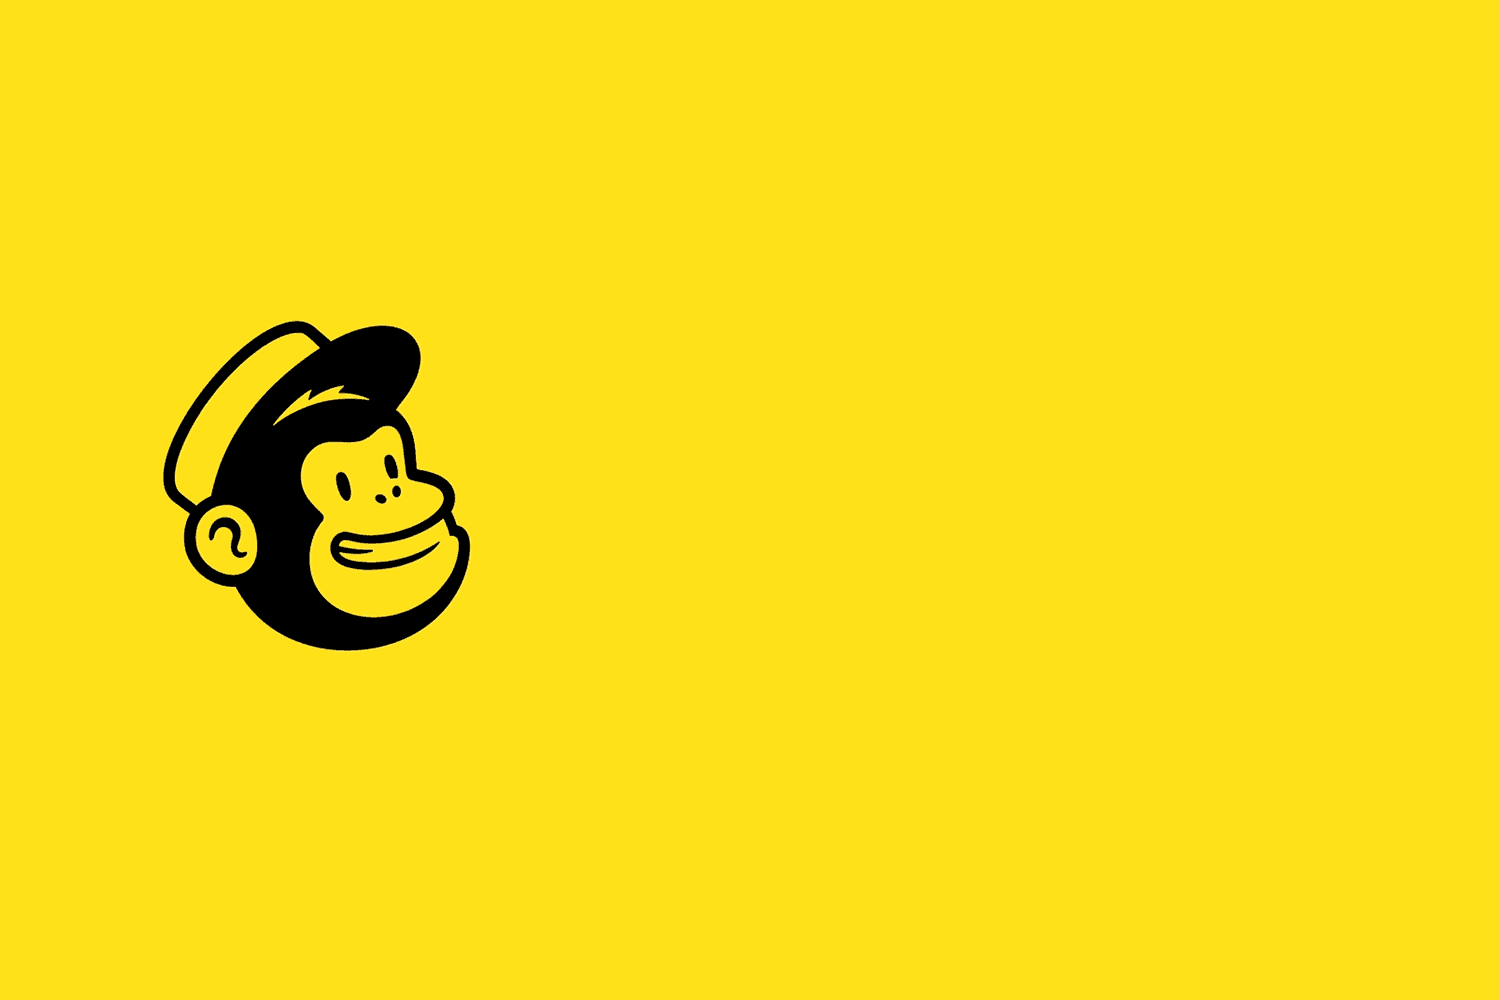 New brand & design for Mailchimp | By Collins